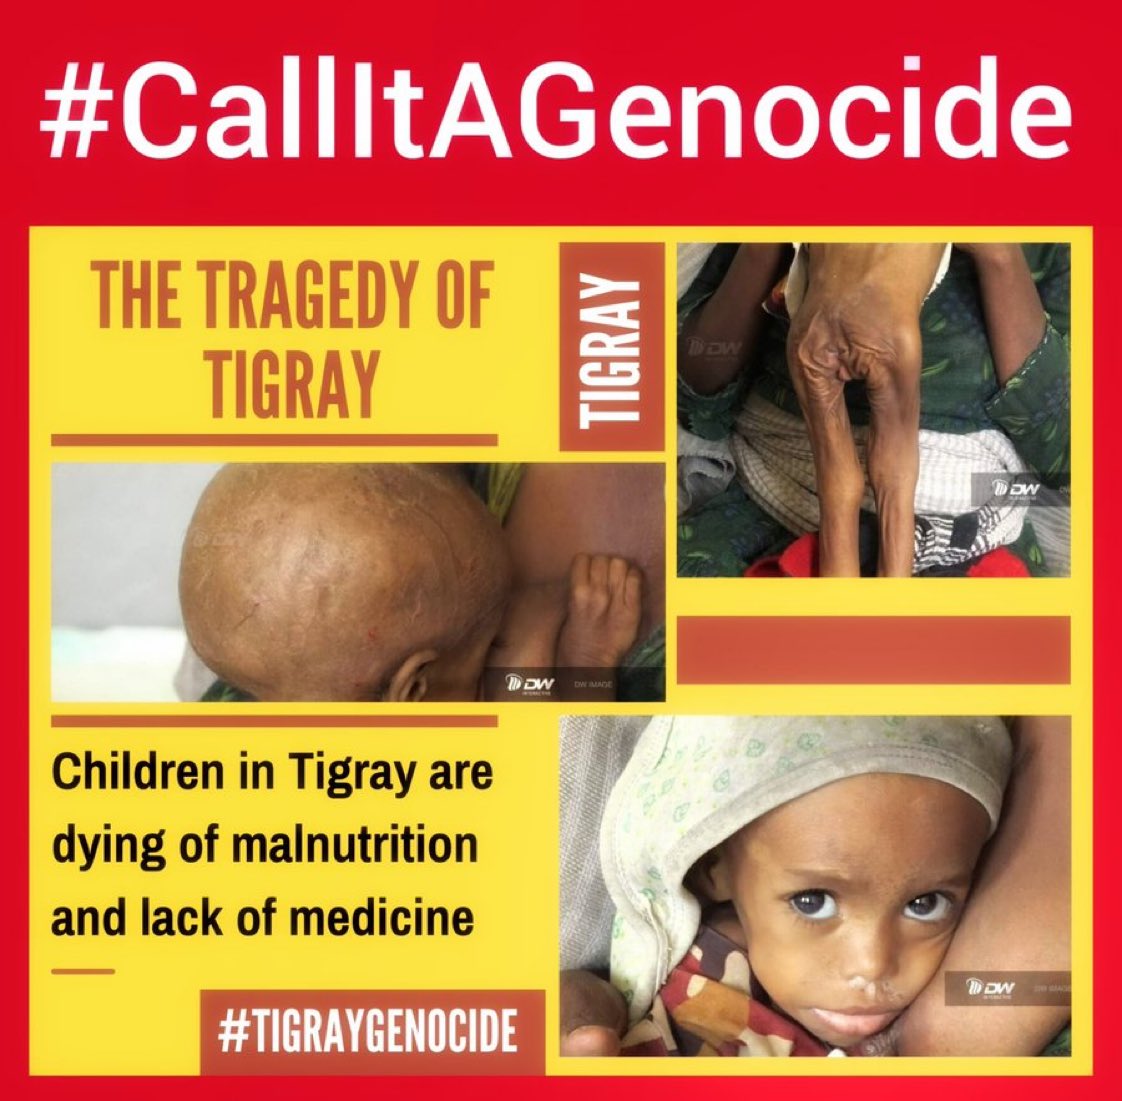 Today marks #142 days since peace deal signed in Pretoria south Africa. But several thousands of Tigrayan civilians are still torturing & detaining in  different  parts of Ethiopia.#StopTigrayGenocide @POTUS @BradSherman @VP @EUCouncil #UNSC @hrw @amnesty @UNHumanRights @UNGeneva